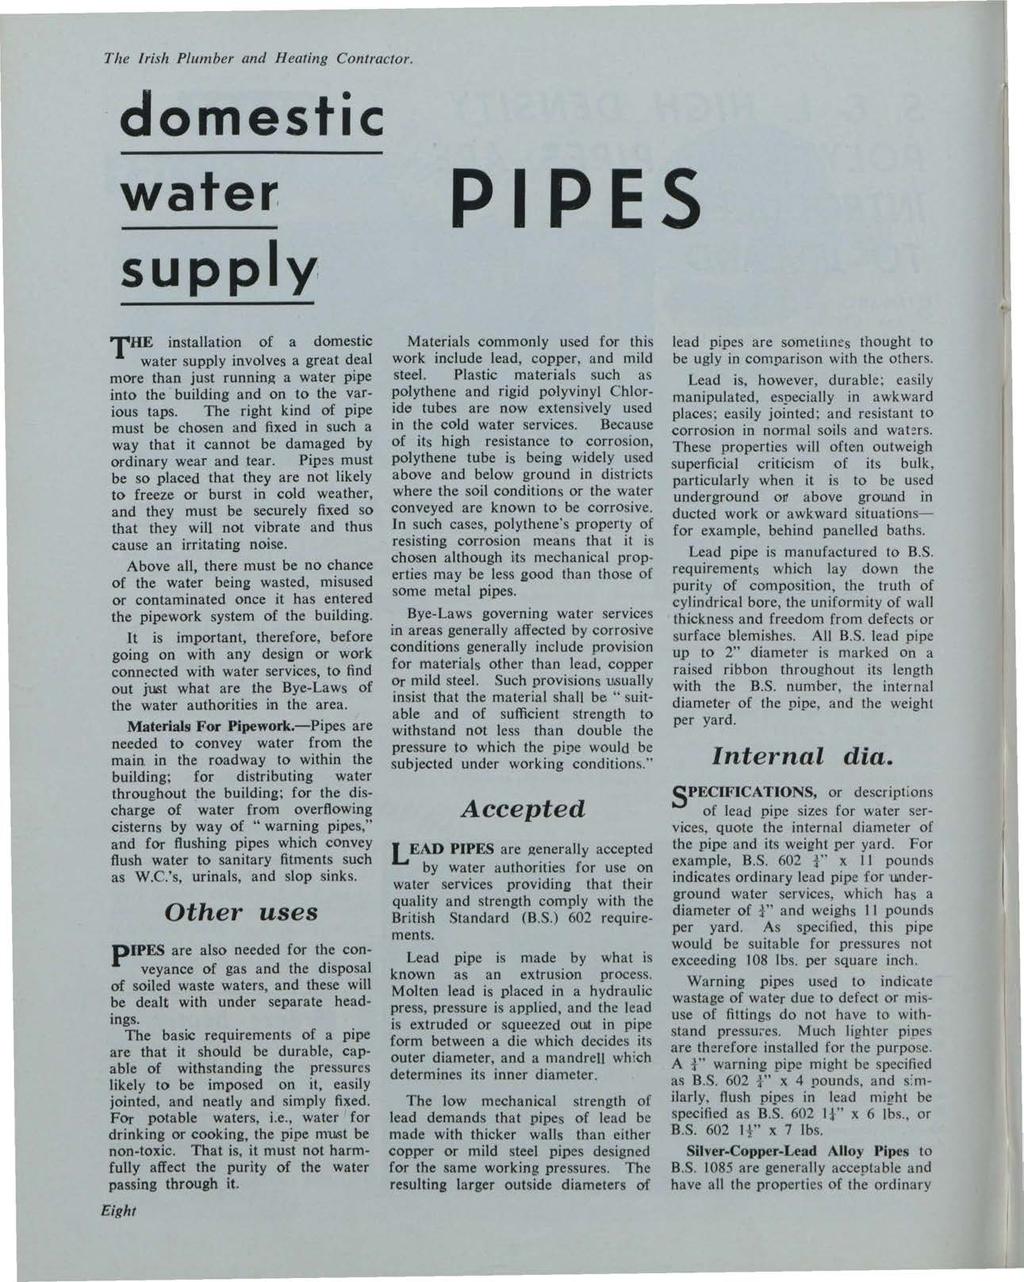 The Irish Plumber and Heating Contractor. Building Services News, Vol. 2, Iss. 12 [1963], Art.